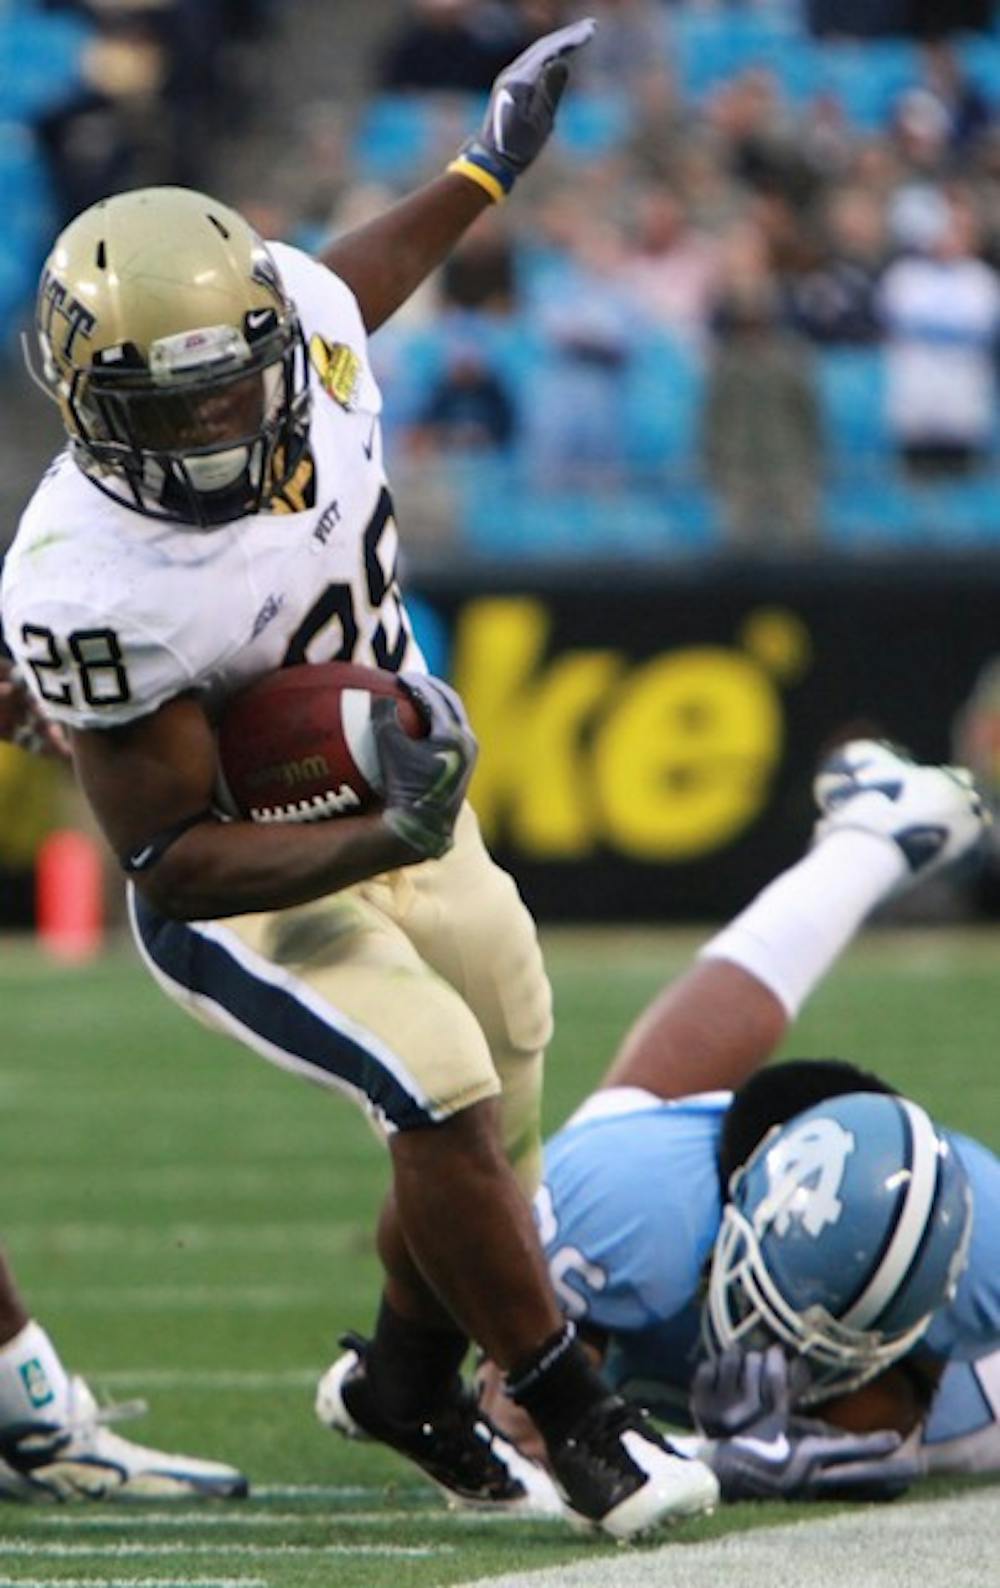 The Tar Heels had trouble catching Pathers freshman running back Dion Lewis, who ran for 159 yards.  DTH/Phong Dinh